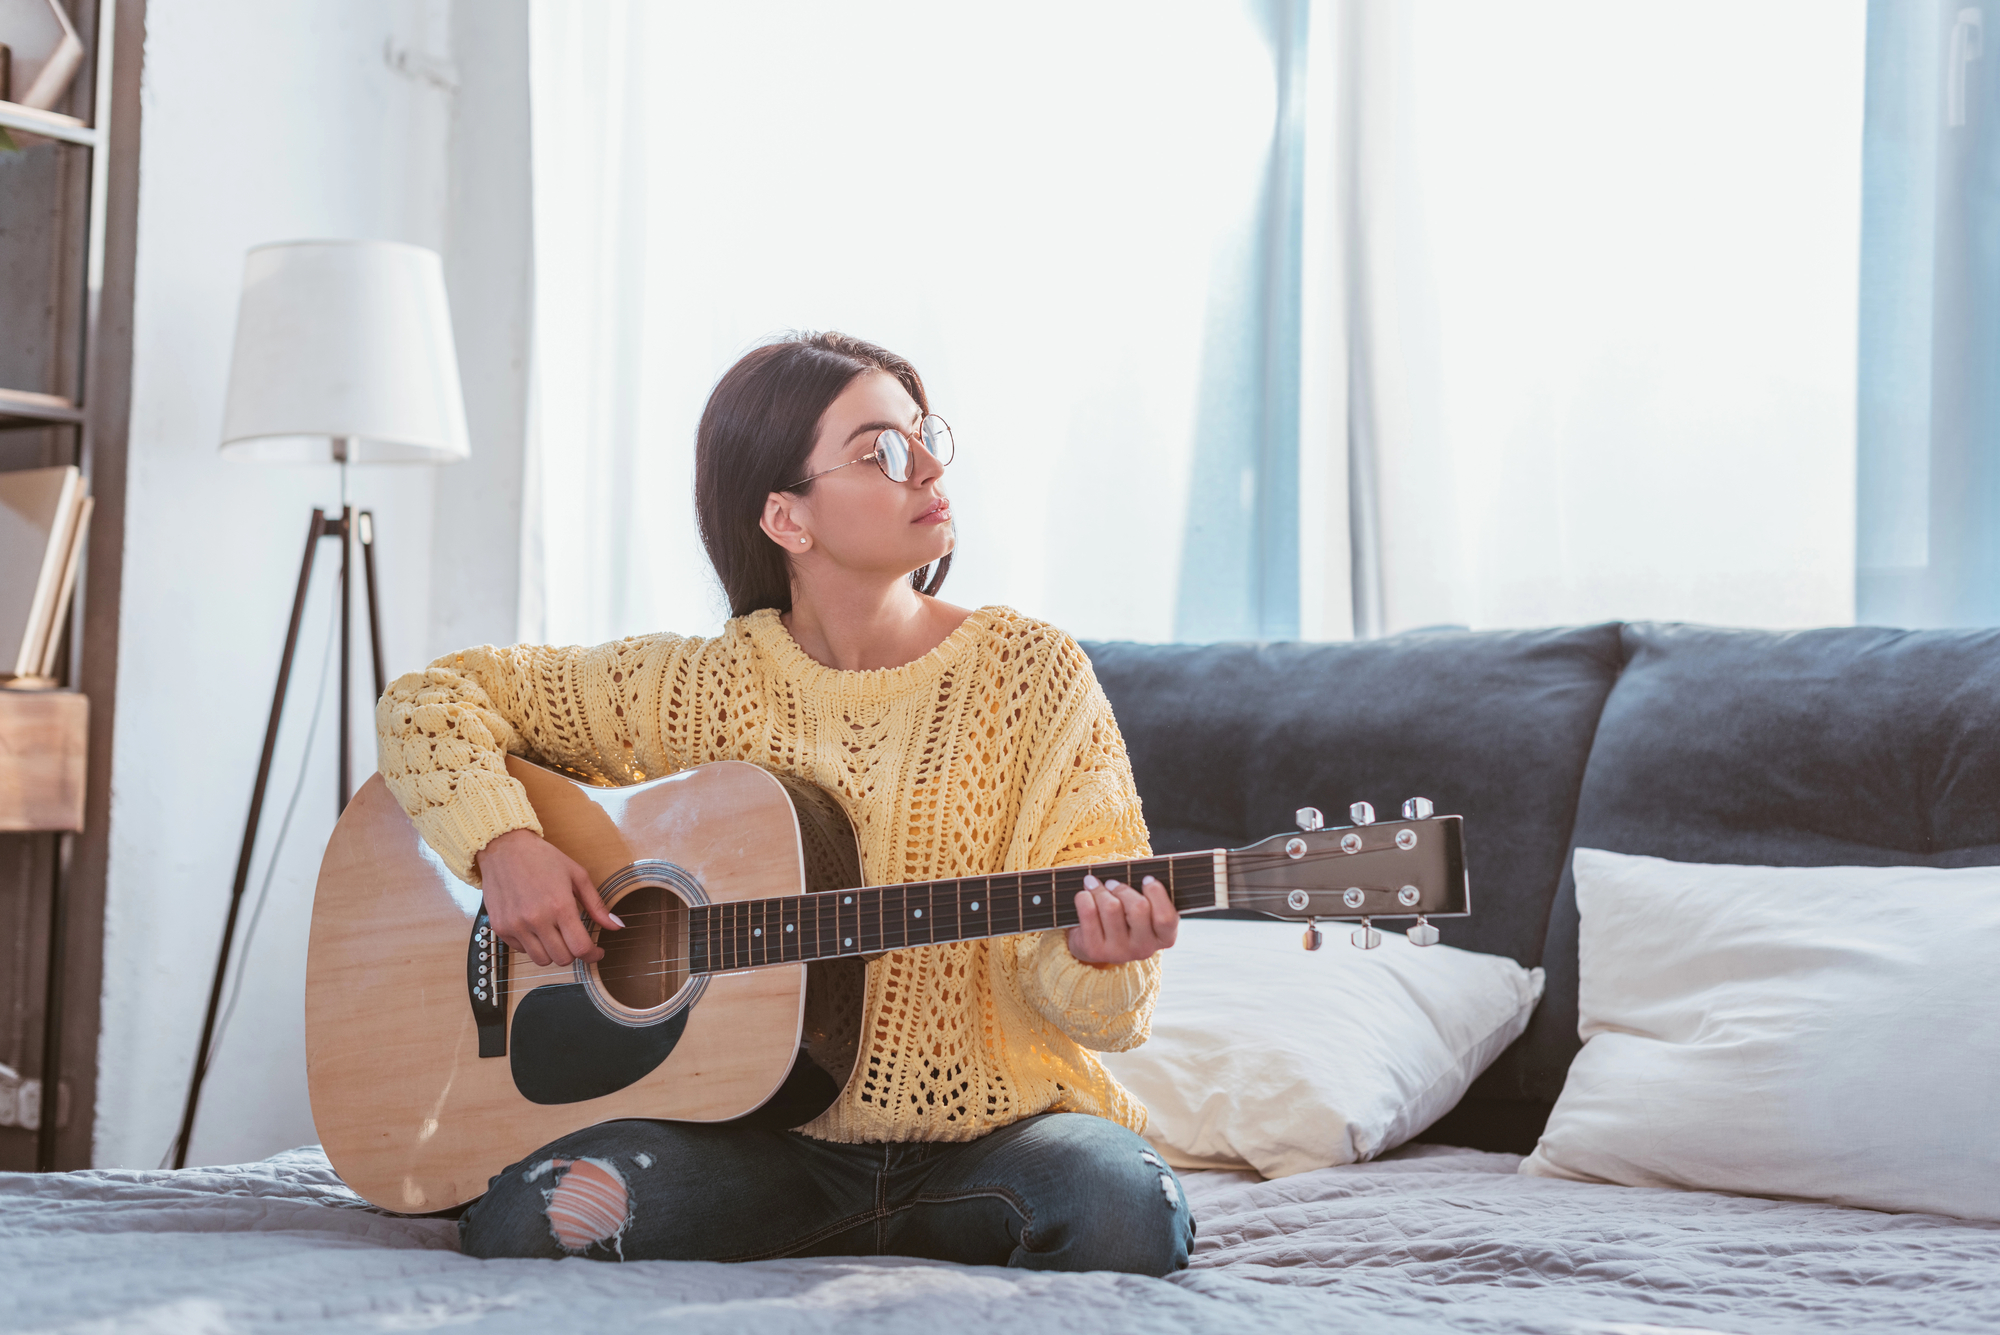 A person with glasses sits on a bed, wearing a yellow sweater and ripped jeans, playing an acoustic guitar. The room has a bright, natural light from a window and a neutral, cozy decor with pillows and a lamp in the background.